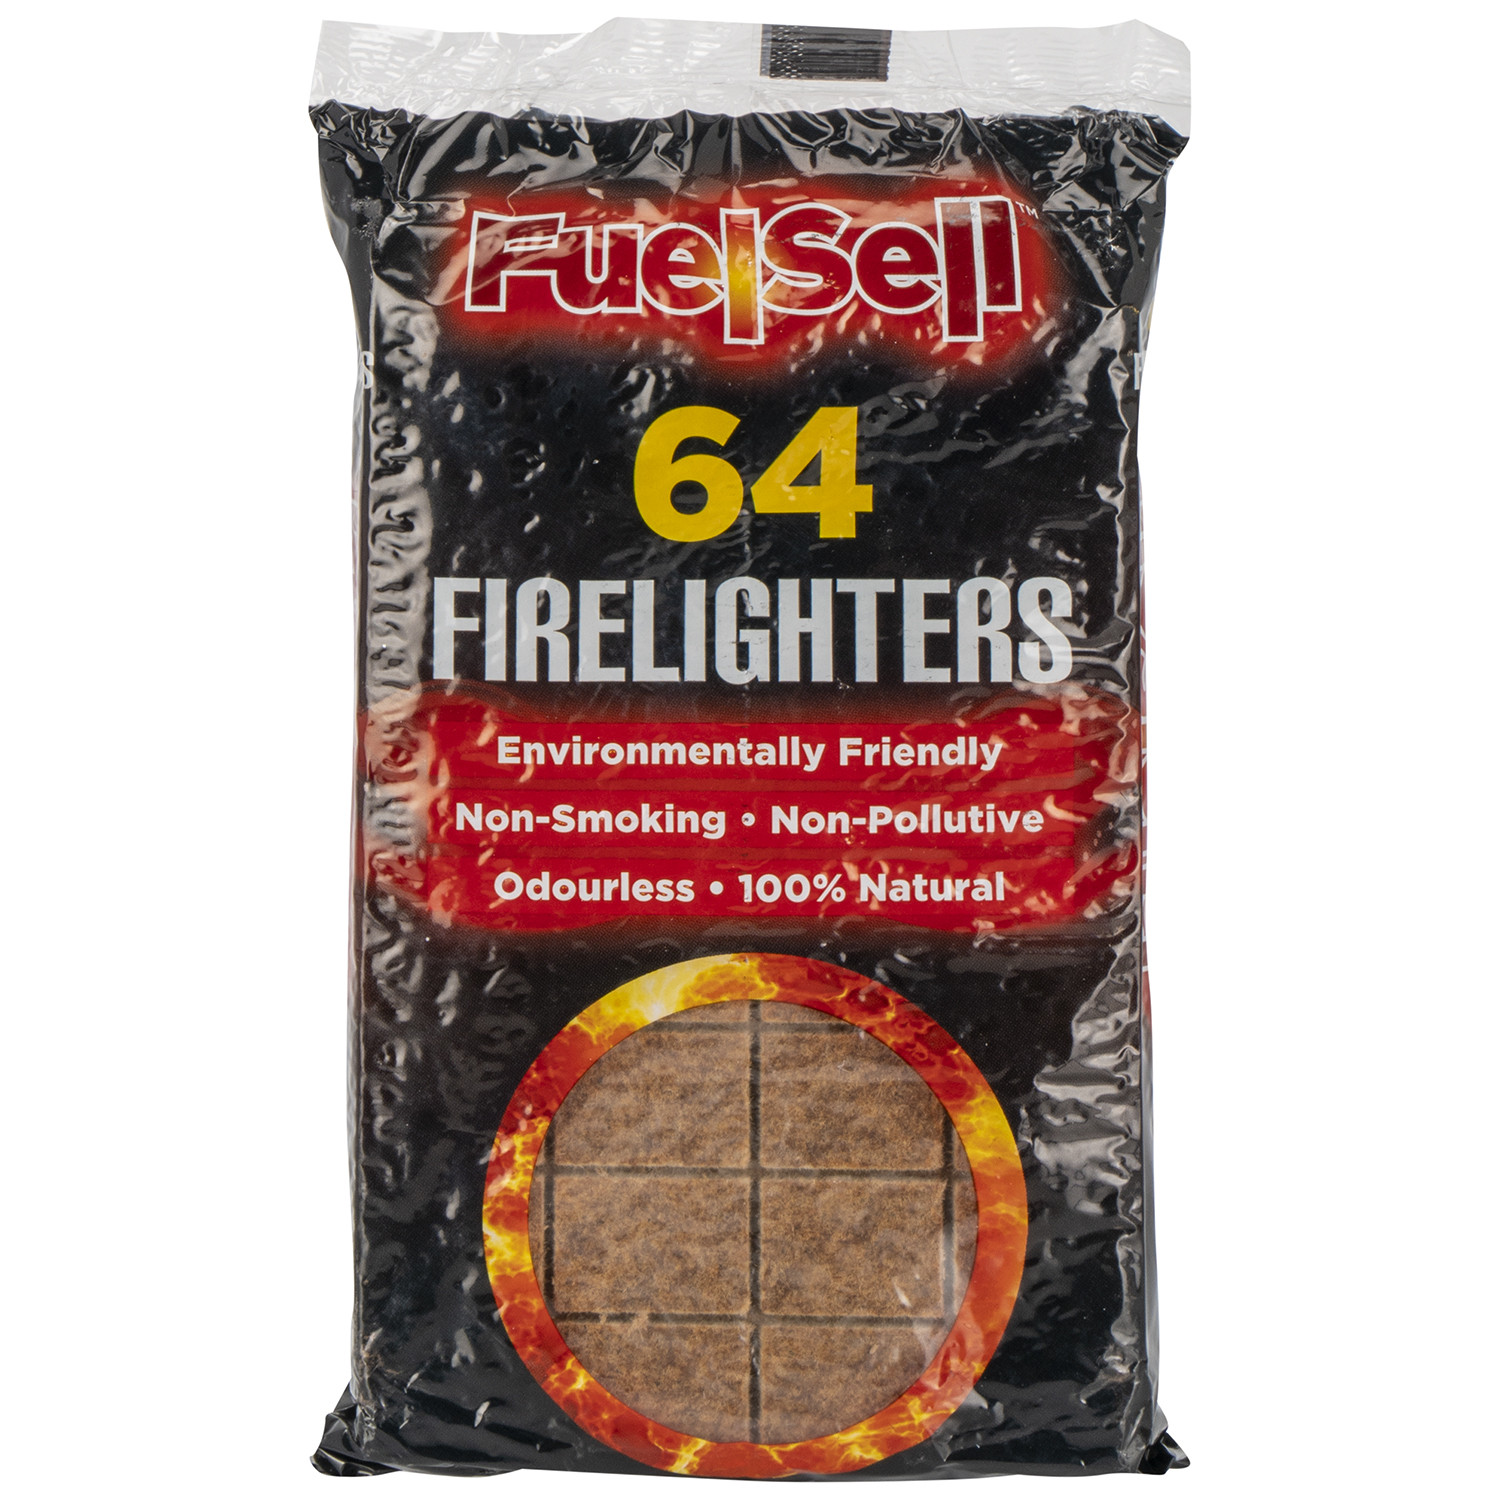 Fuelsell Eco Firelighters 64 Pack Image